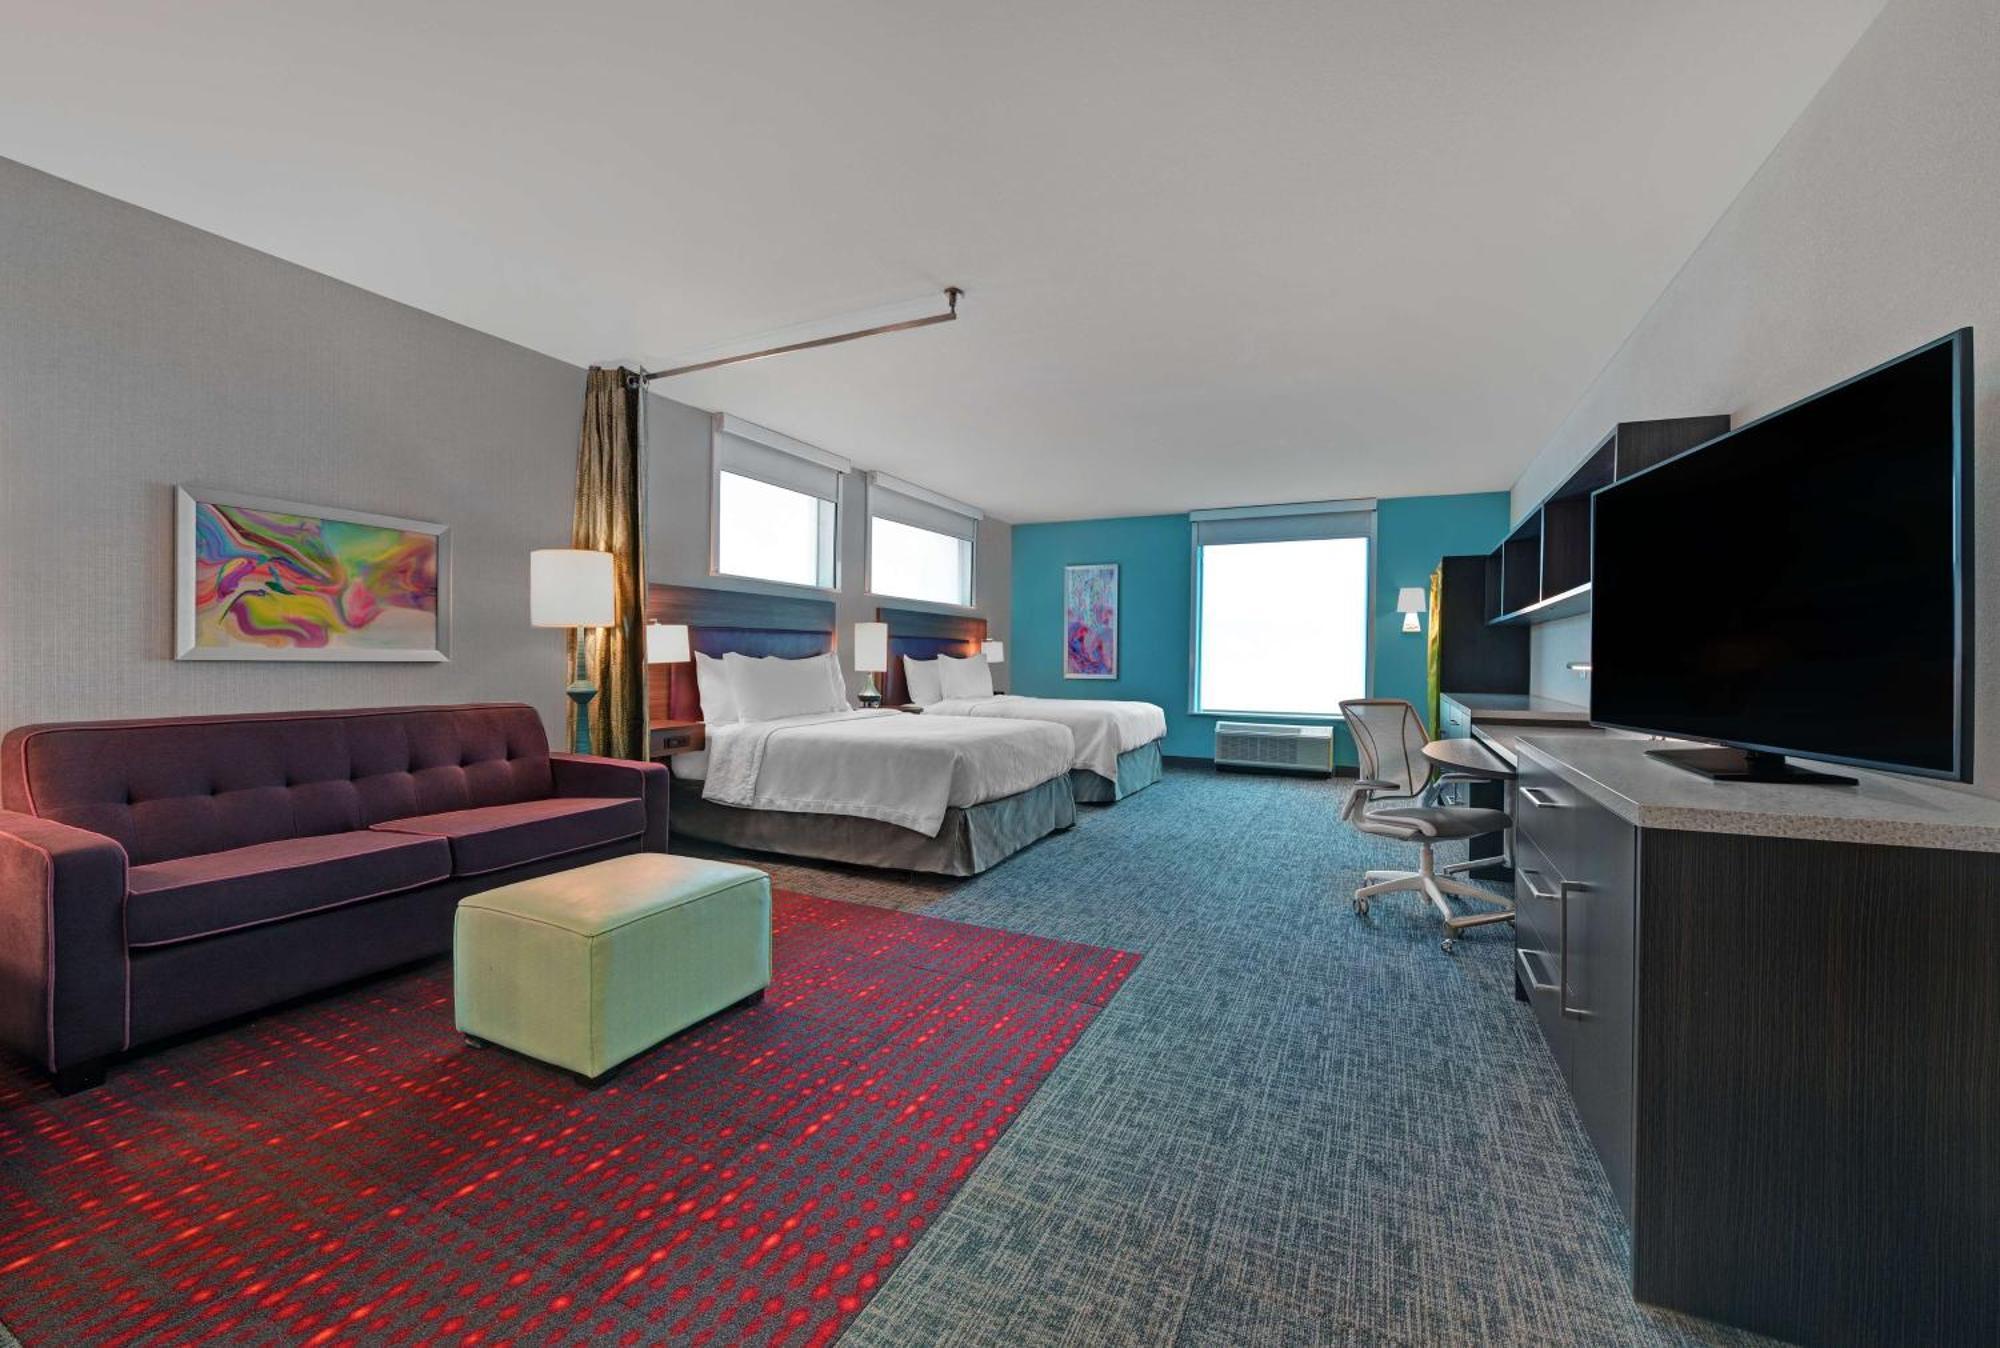 Home2 Suites By Hilton Memphis Wolfchase Galleria Εξωτερικό φωτογραφία